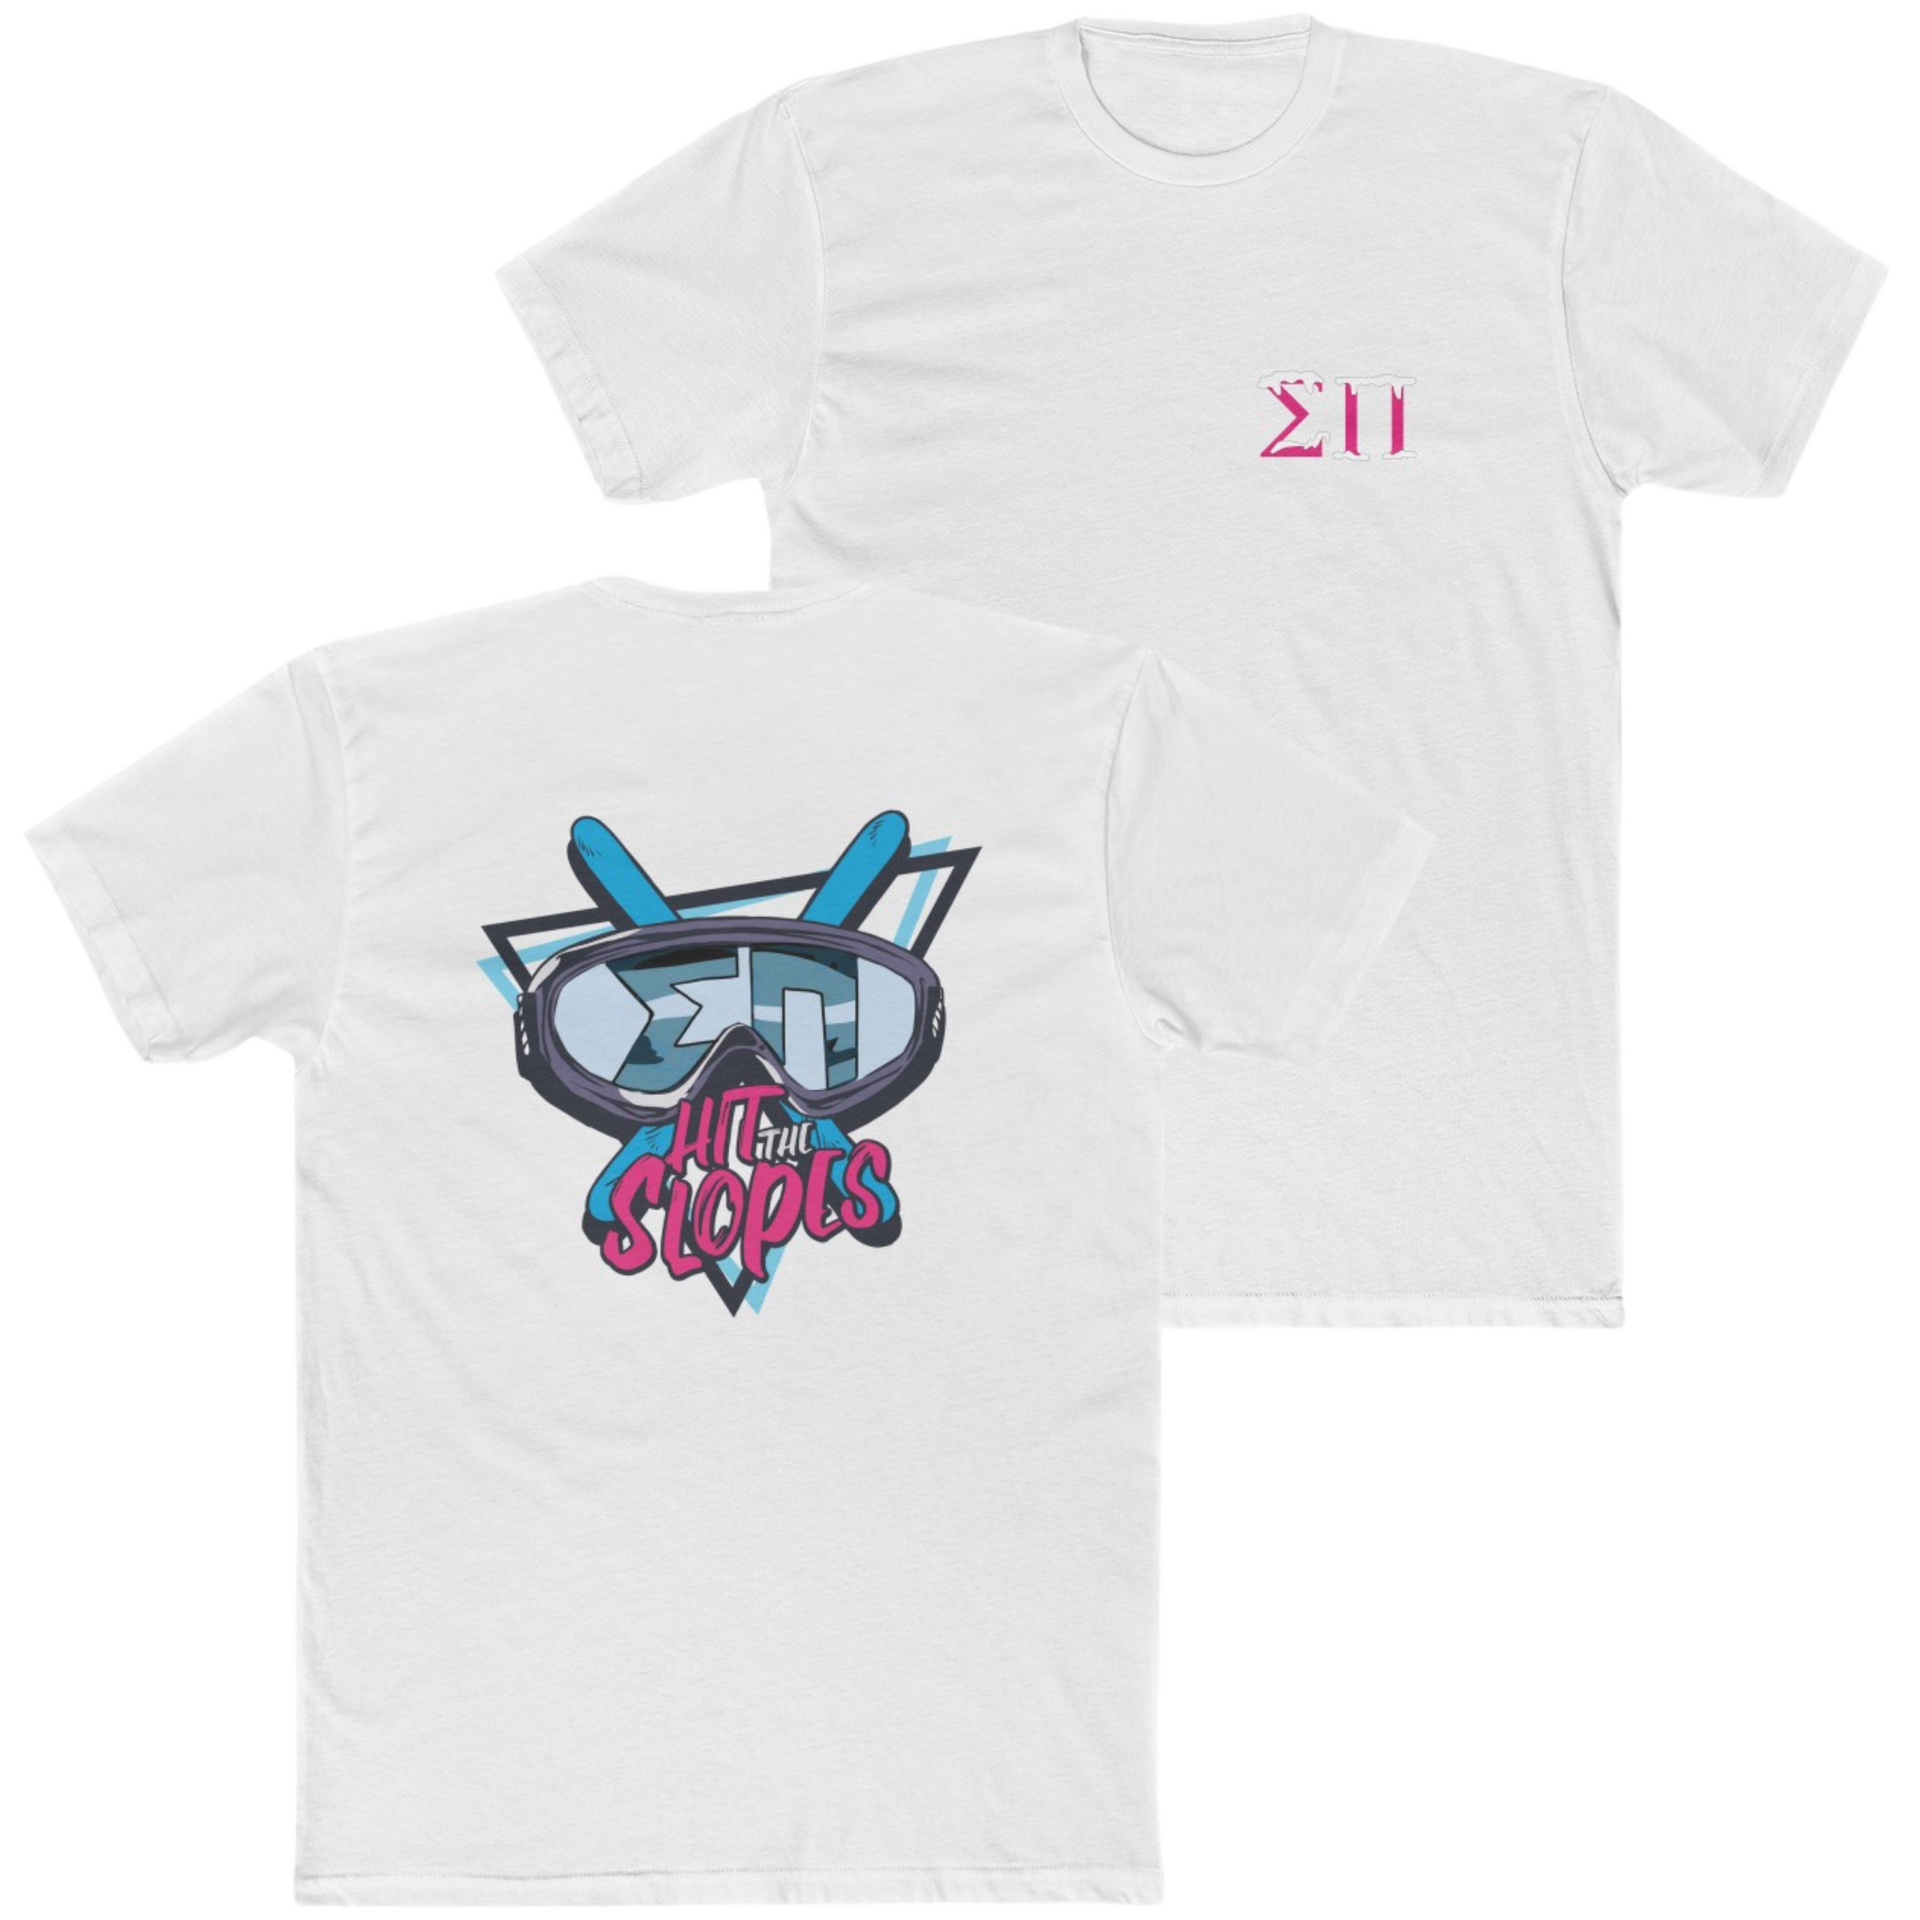 White Sigma Pi Graphic T-Shirt | Hit the Slopes | Sigma Pi Apparel and Merchandise